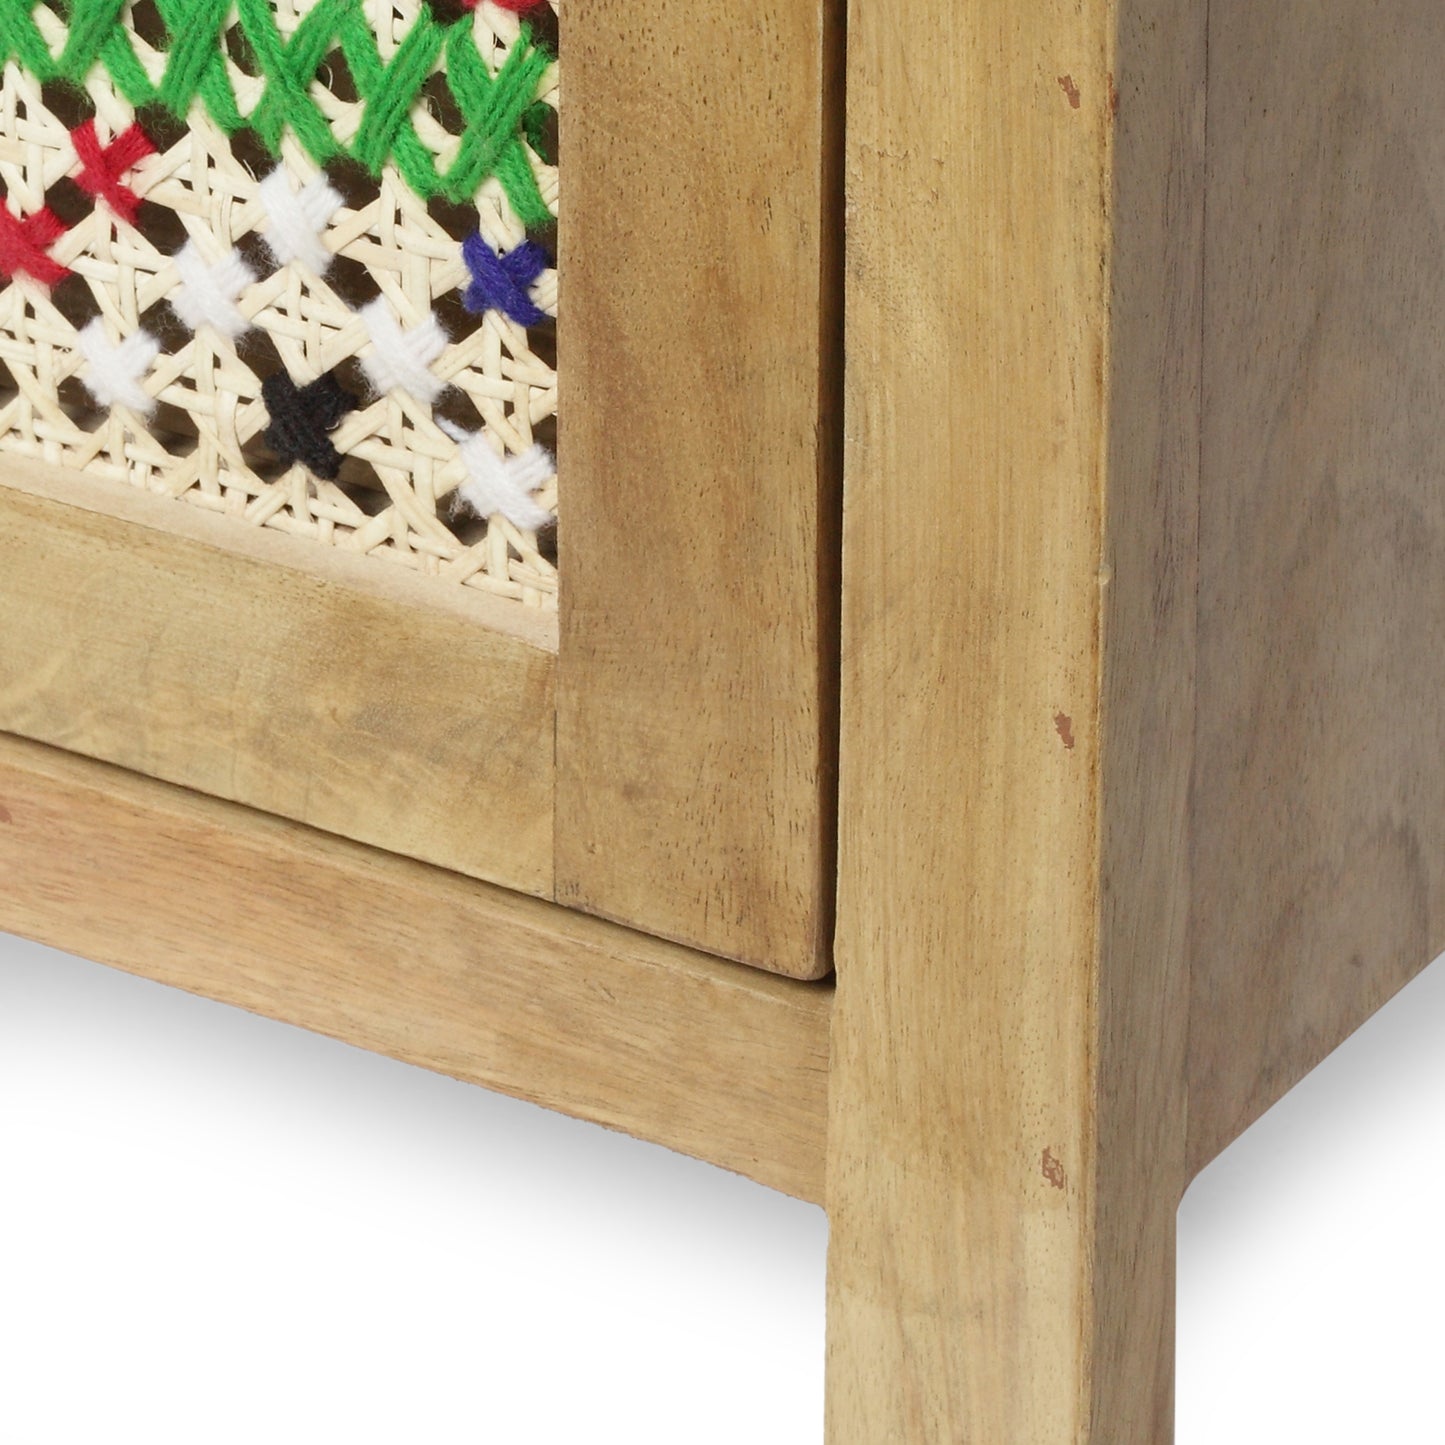 Reser Boho Handcrafted Mango Wood Nightstand with Wool Accents, Natural and Multi-Colored